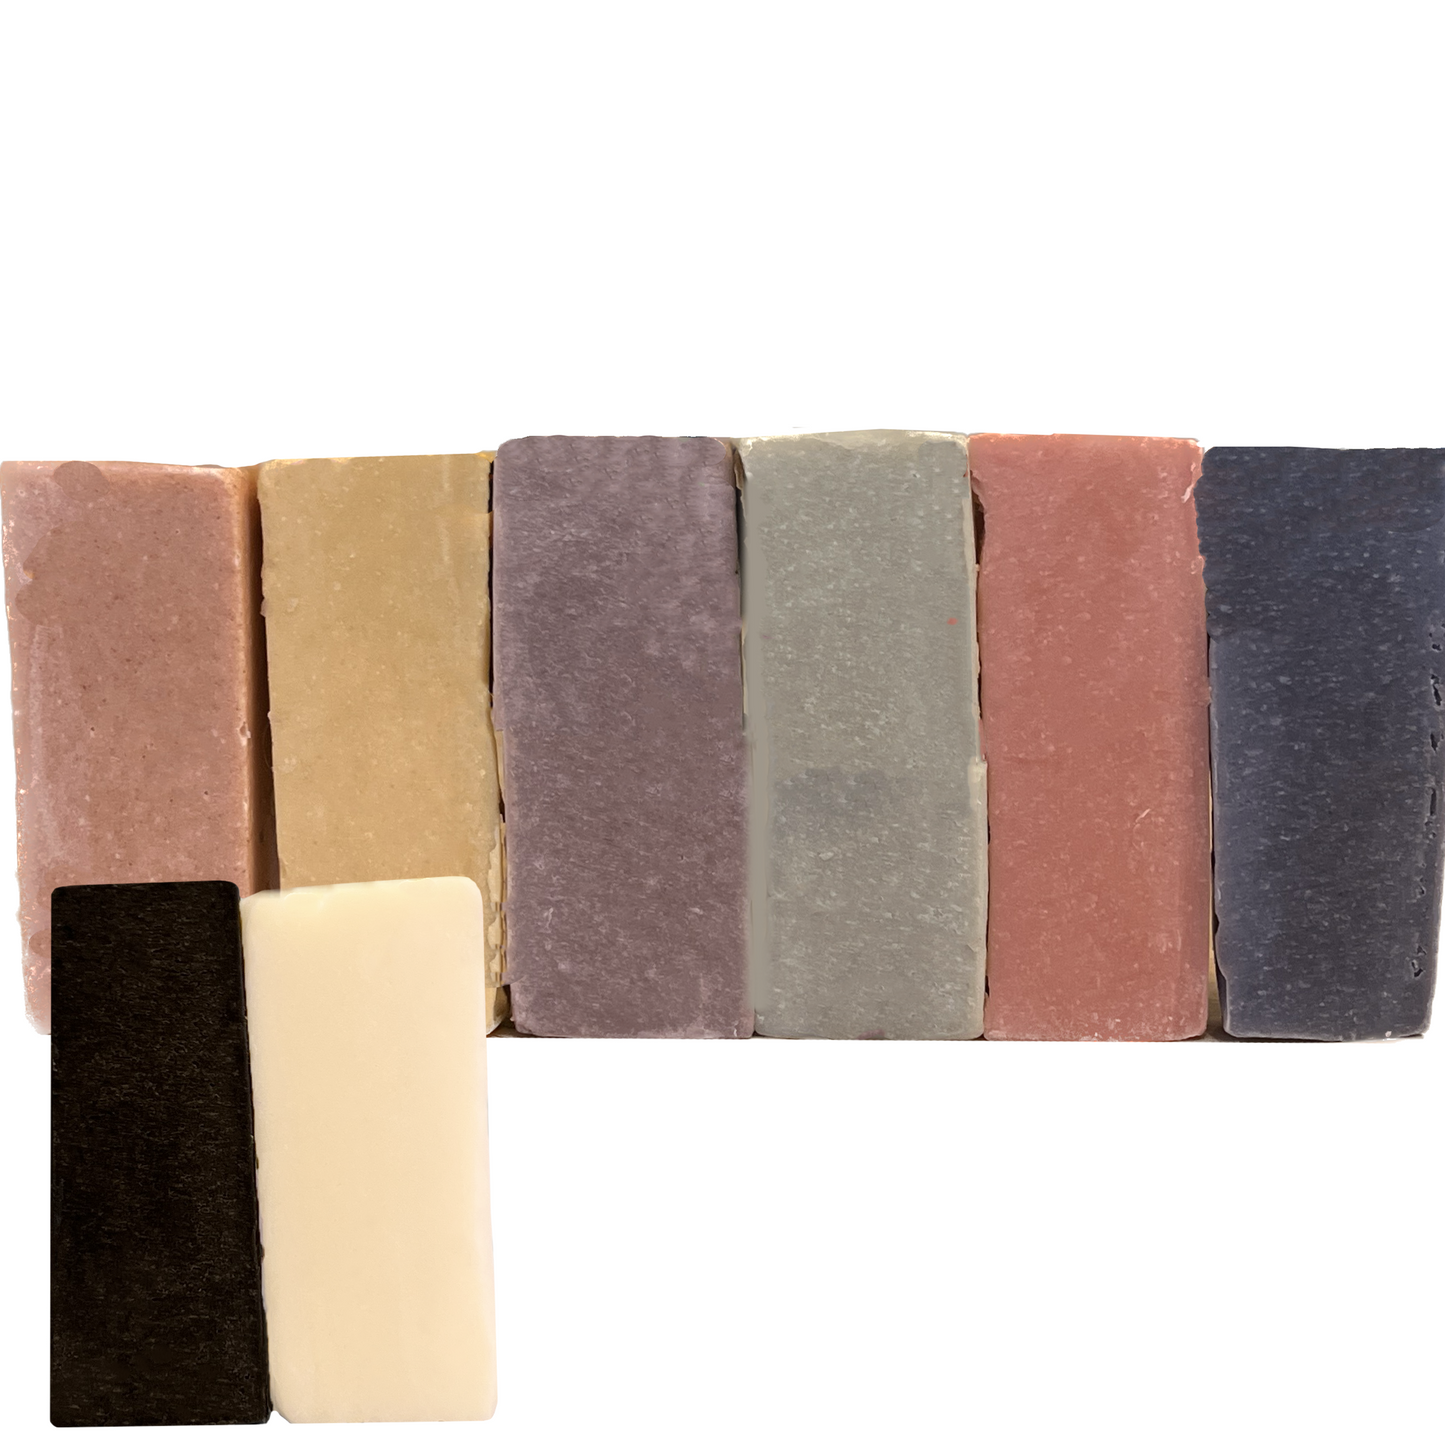 Soap Dough Co. - Earth Kit - Wall of sienna brown, desert green, dark purple, brown/orange, salmon pink, gold, with black and white accent colors.